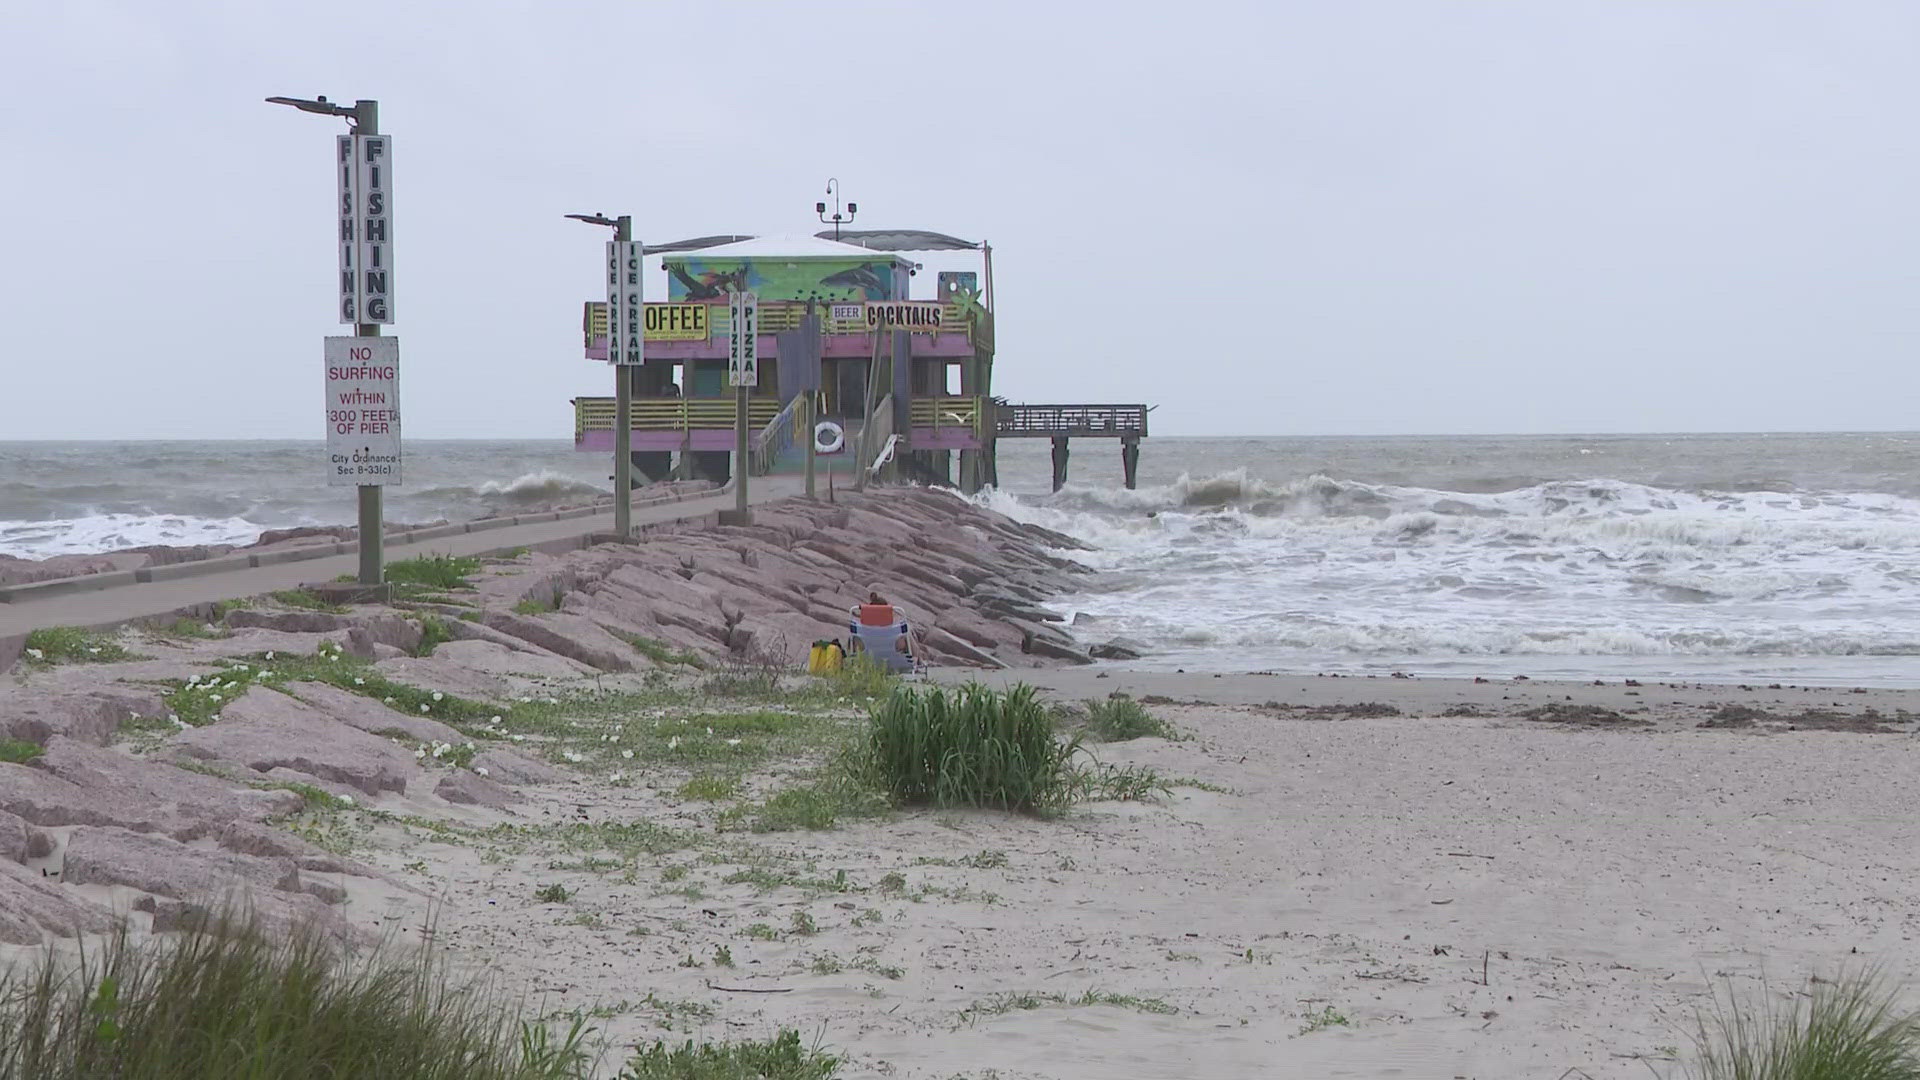 The study will focus on Texas bays and beaches with historically high levels of bacteria.